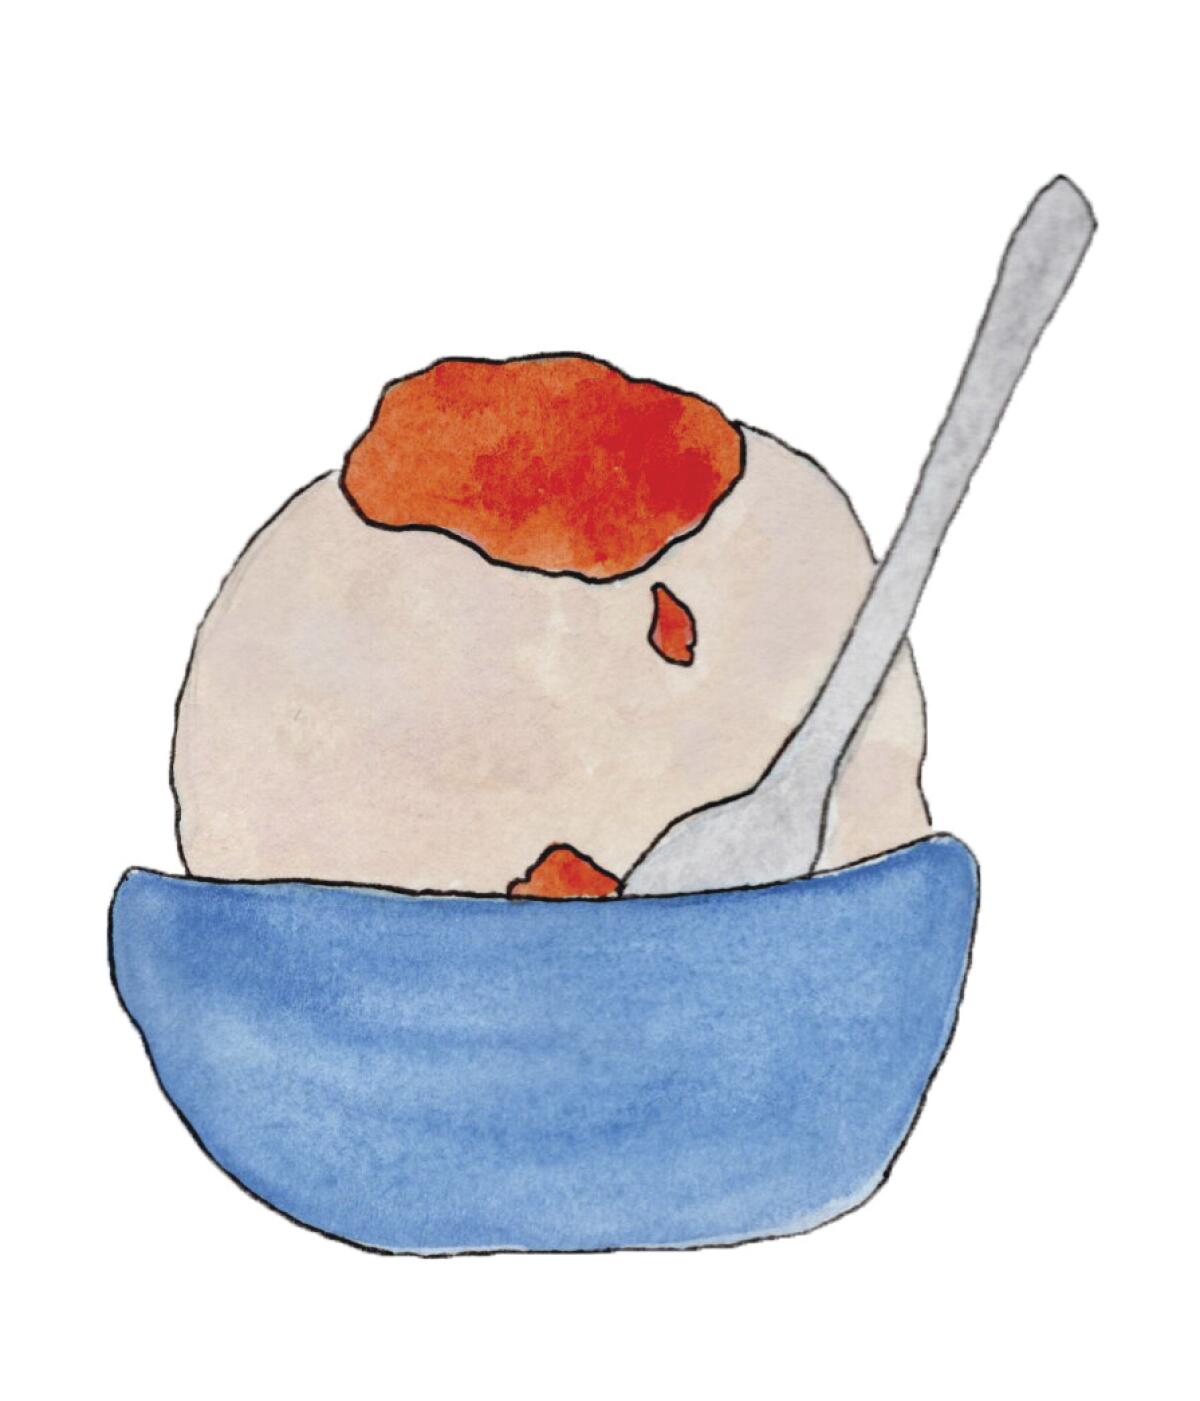 Spoon it over scoops of ice cream for an instant fruit sundae.